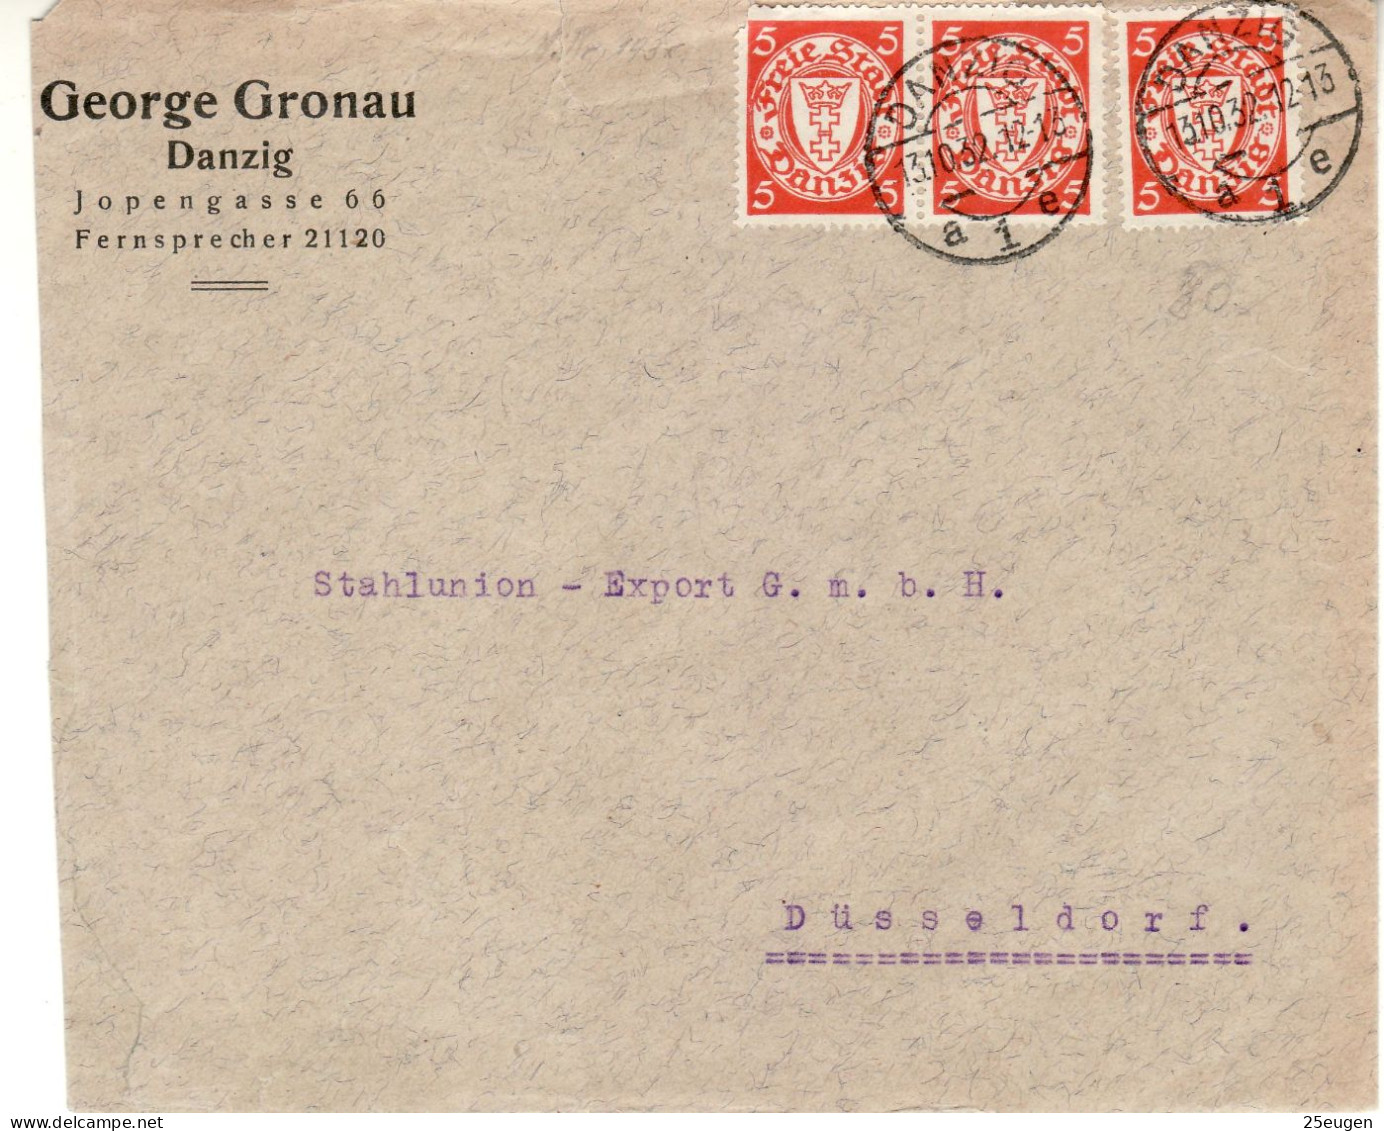 DANZIG 1932  LETTER SENT FROM DANZIG TO DUESSELDORF - Covers & Documents